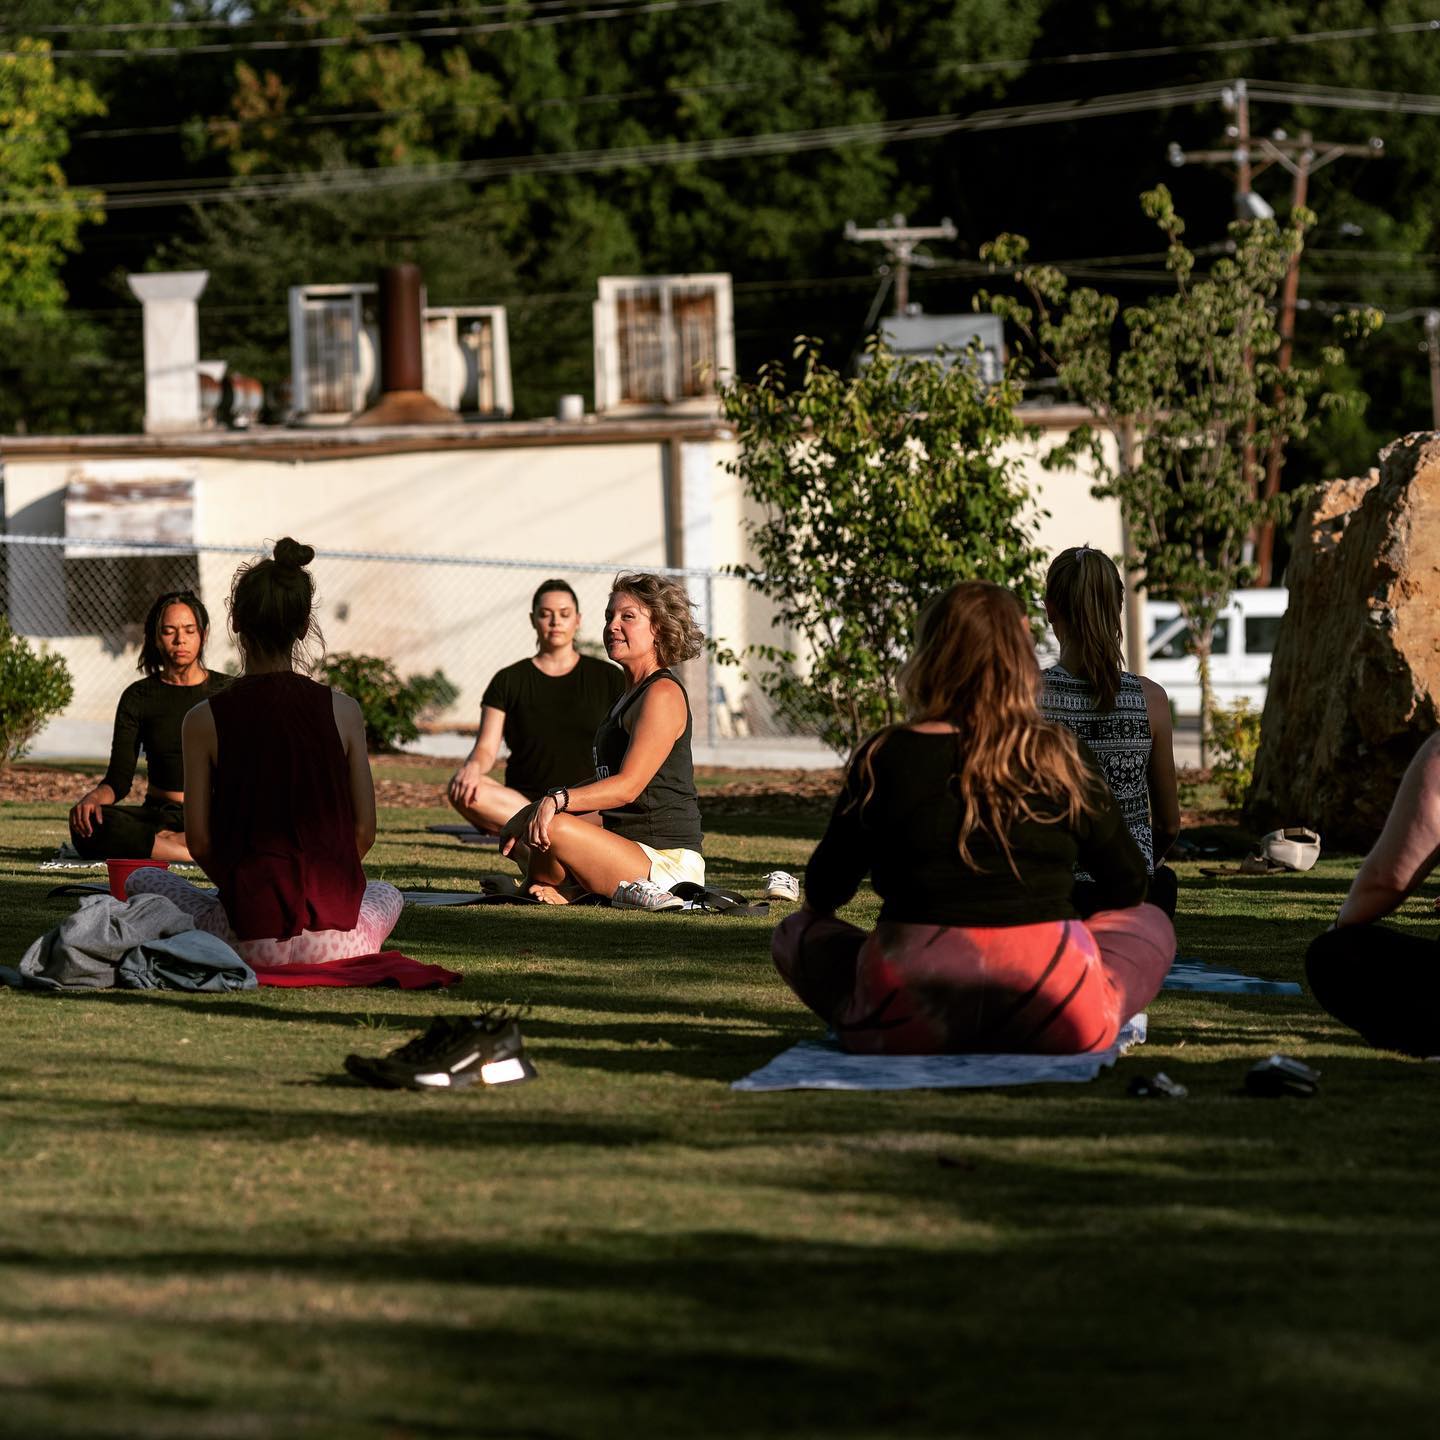 What is Fretwell? Fretwell is community!
Yoga, Farmers Markets, joyous Fridays Off the Clock, &amp; quiet Sundays with family and friends! The lawn is where it’s at! Have a drink, a bite to eat, and take a load off!